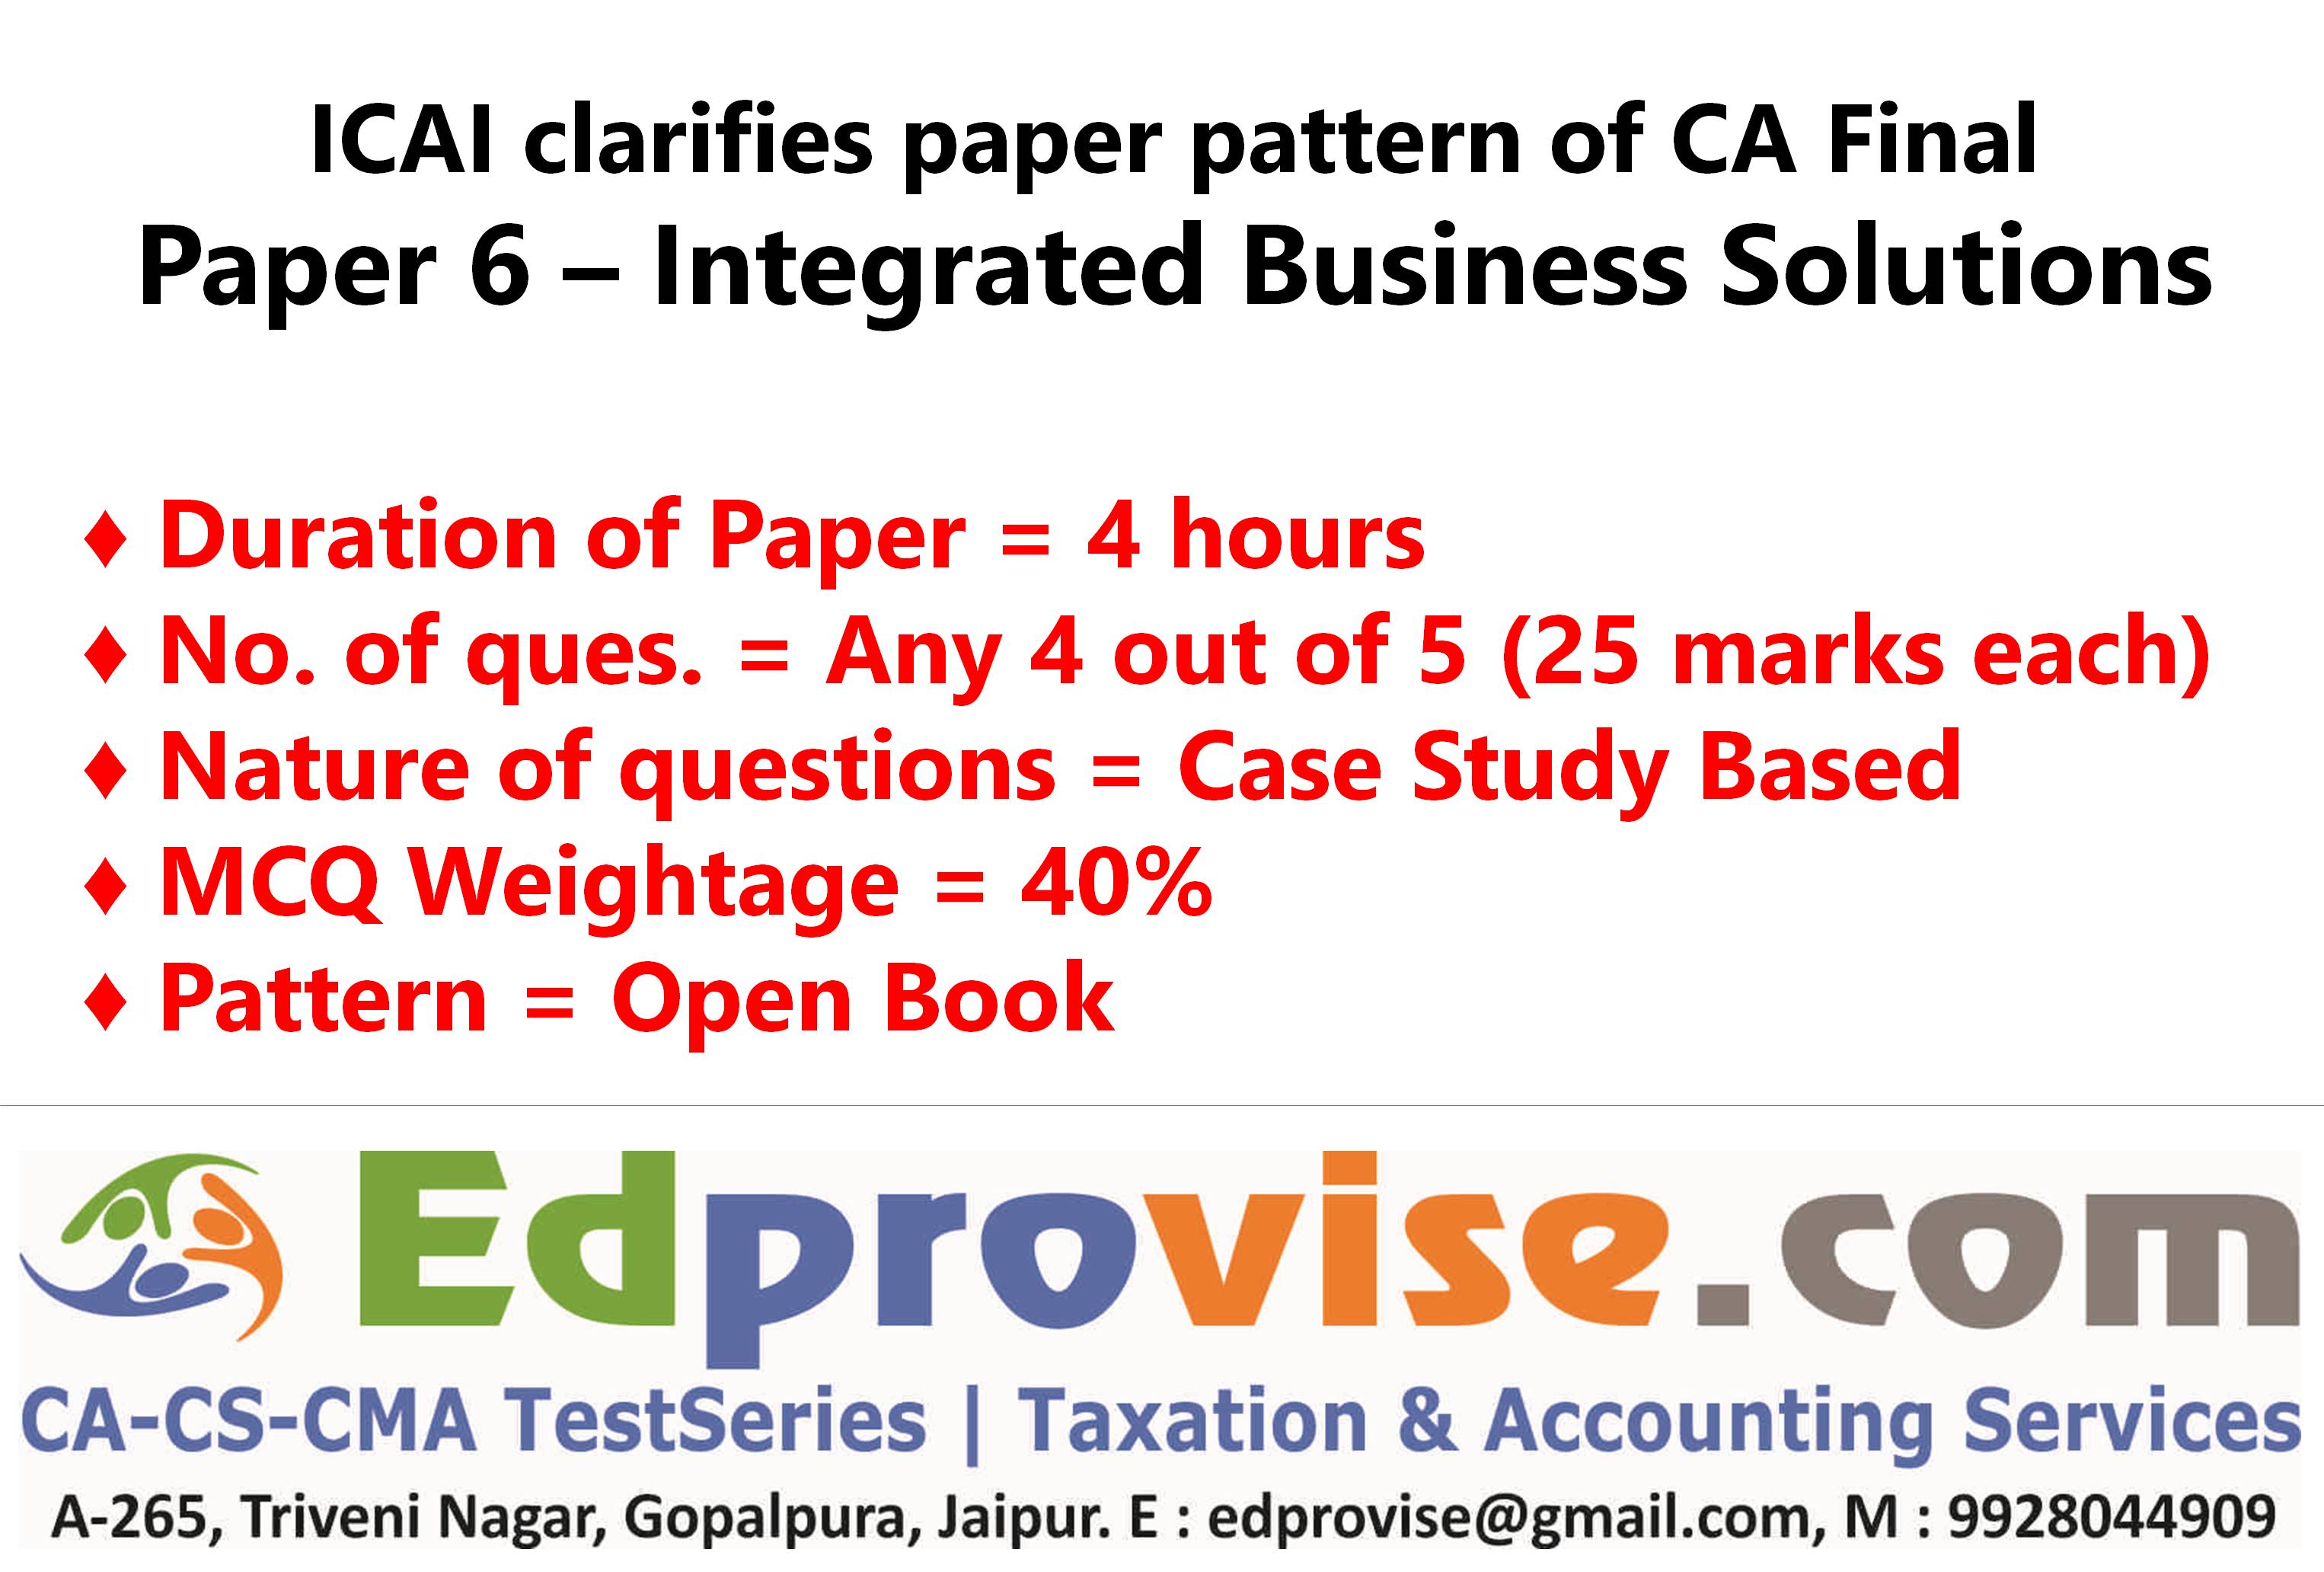 CA Final - Paper 6 - Integrated Business Solutions - Paper Pattern